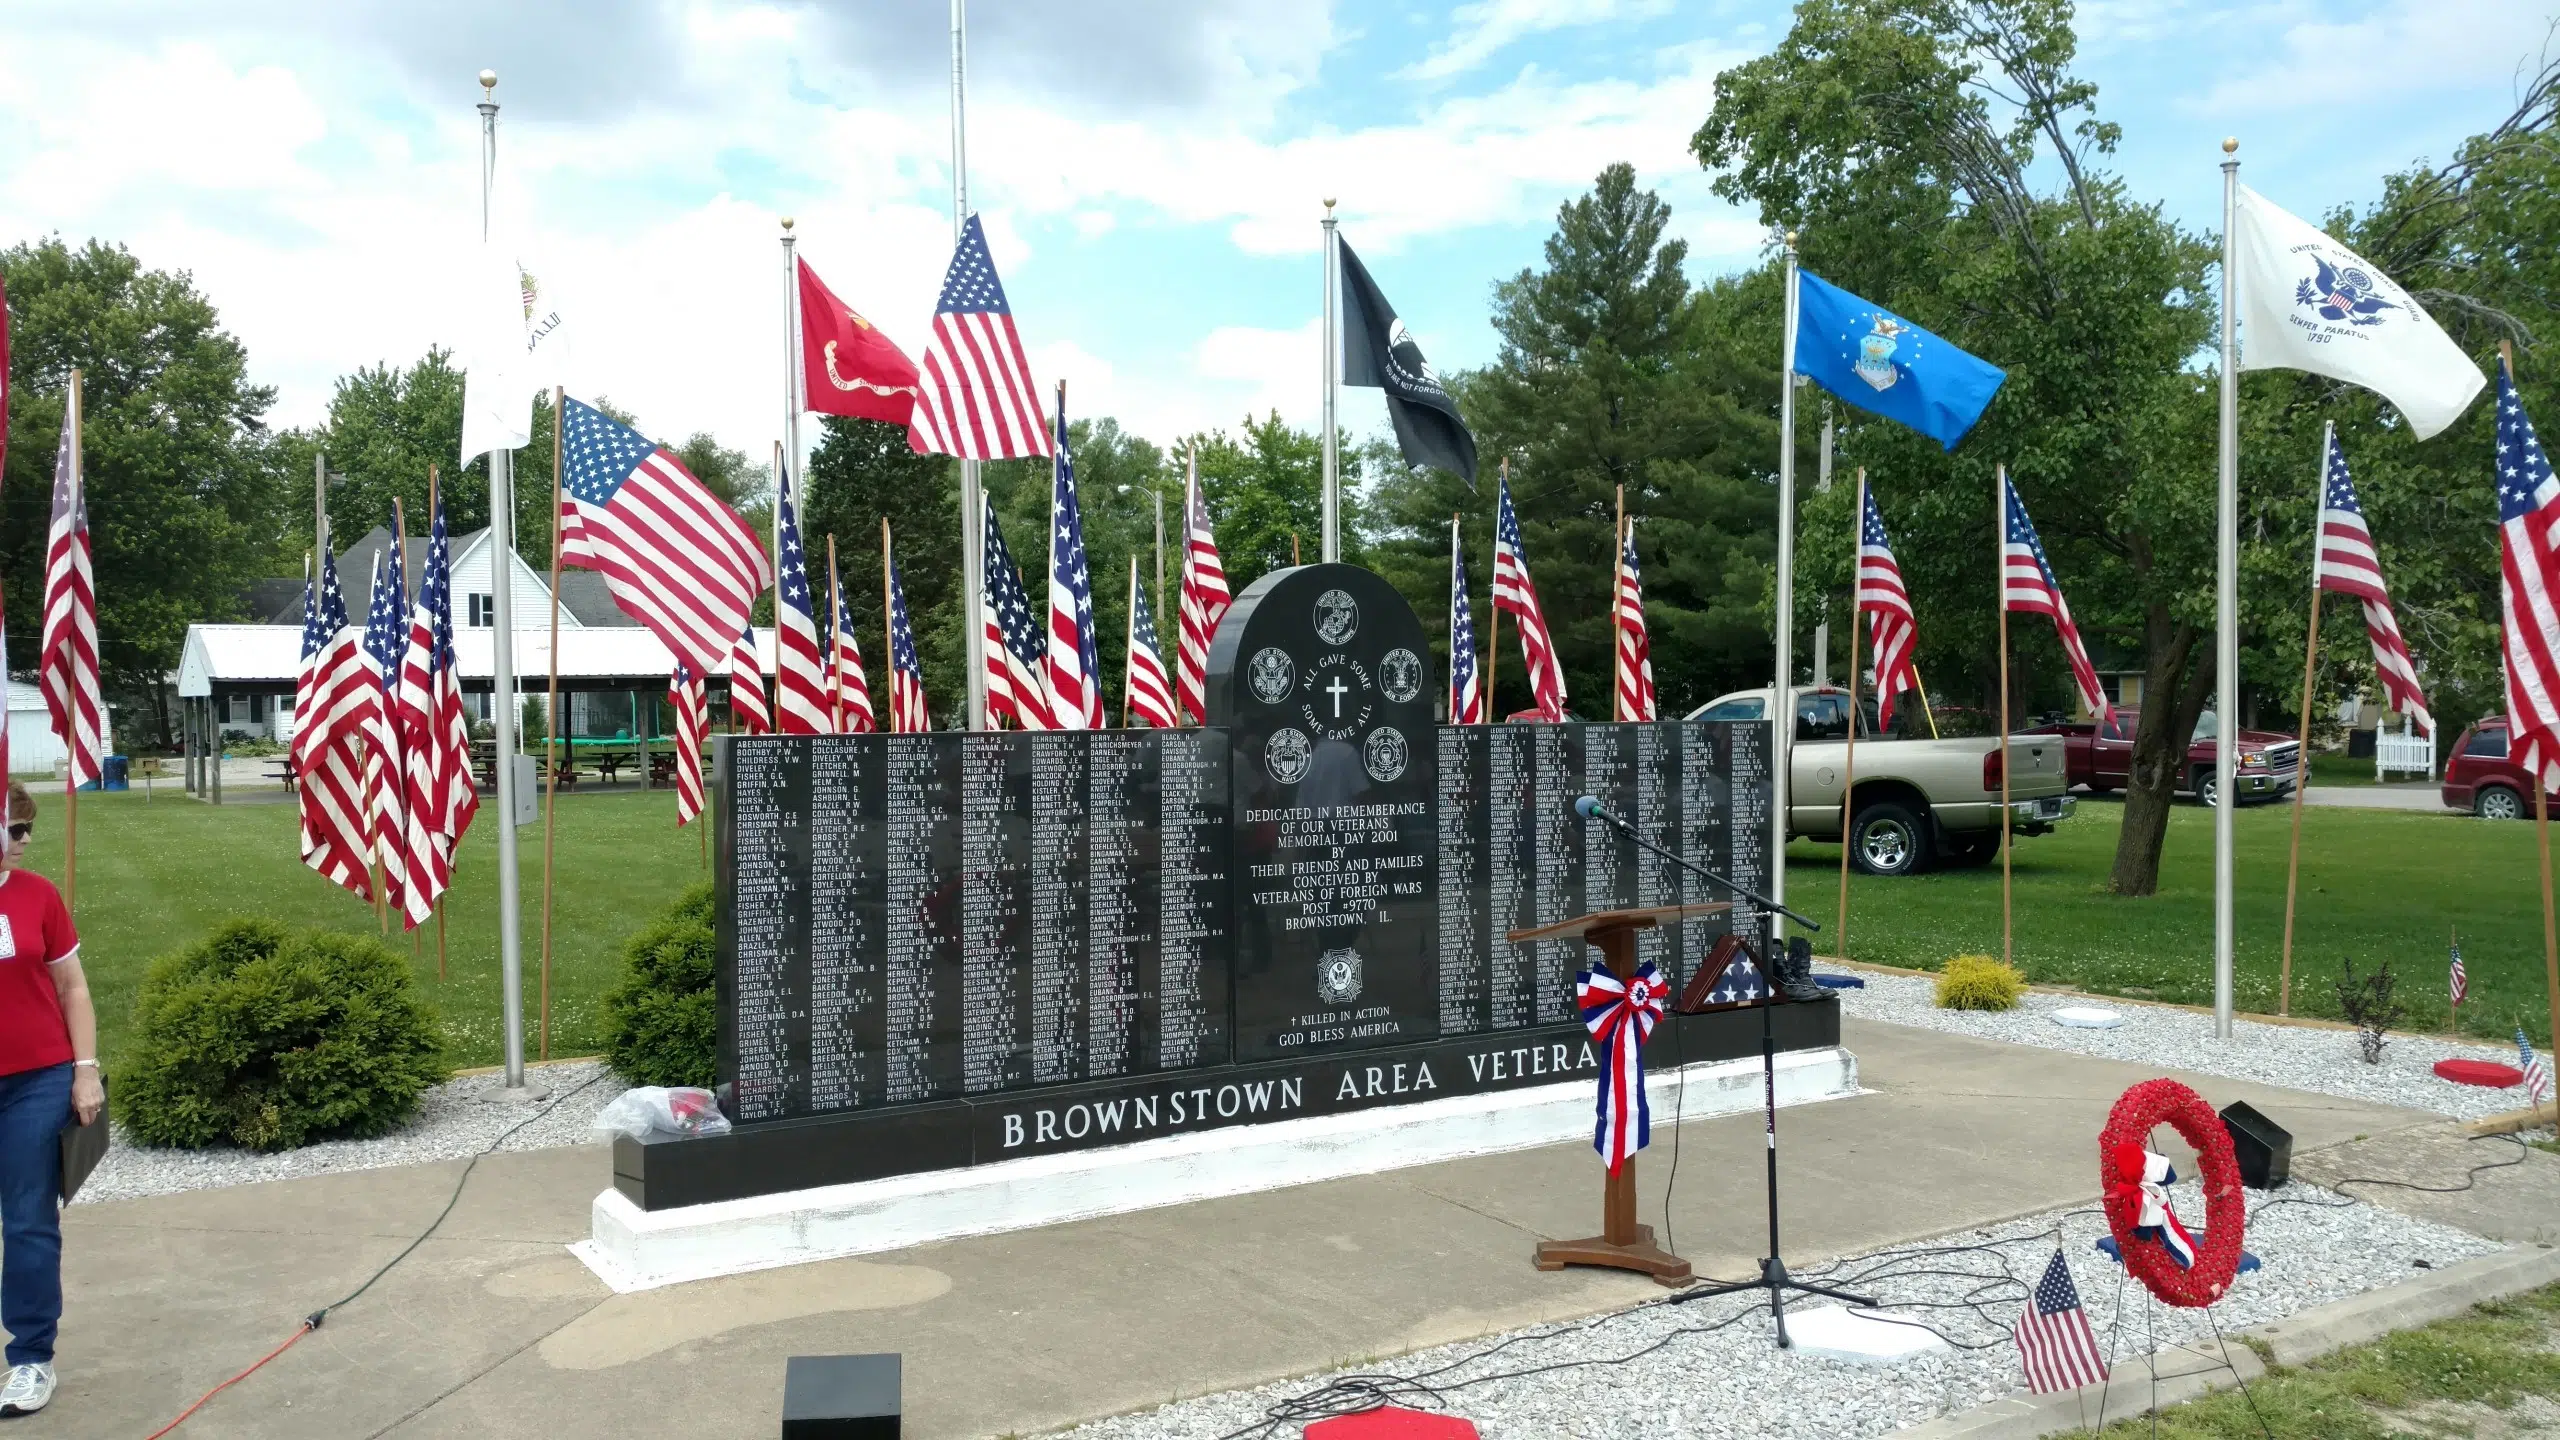 Large crowd on hand for Brownstown Memorial Day service 